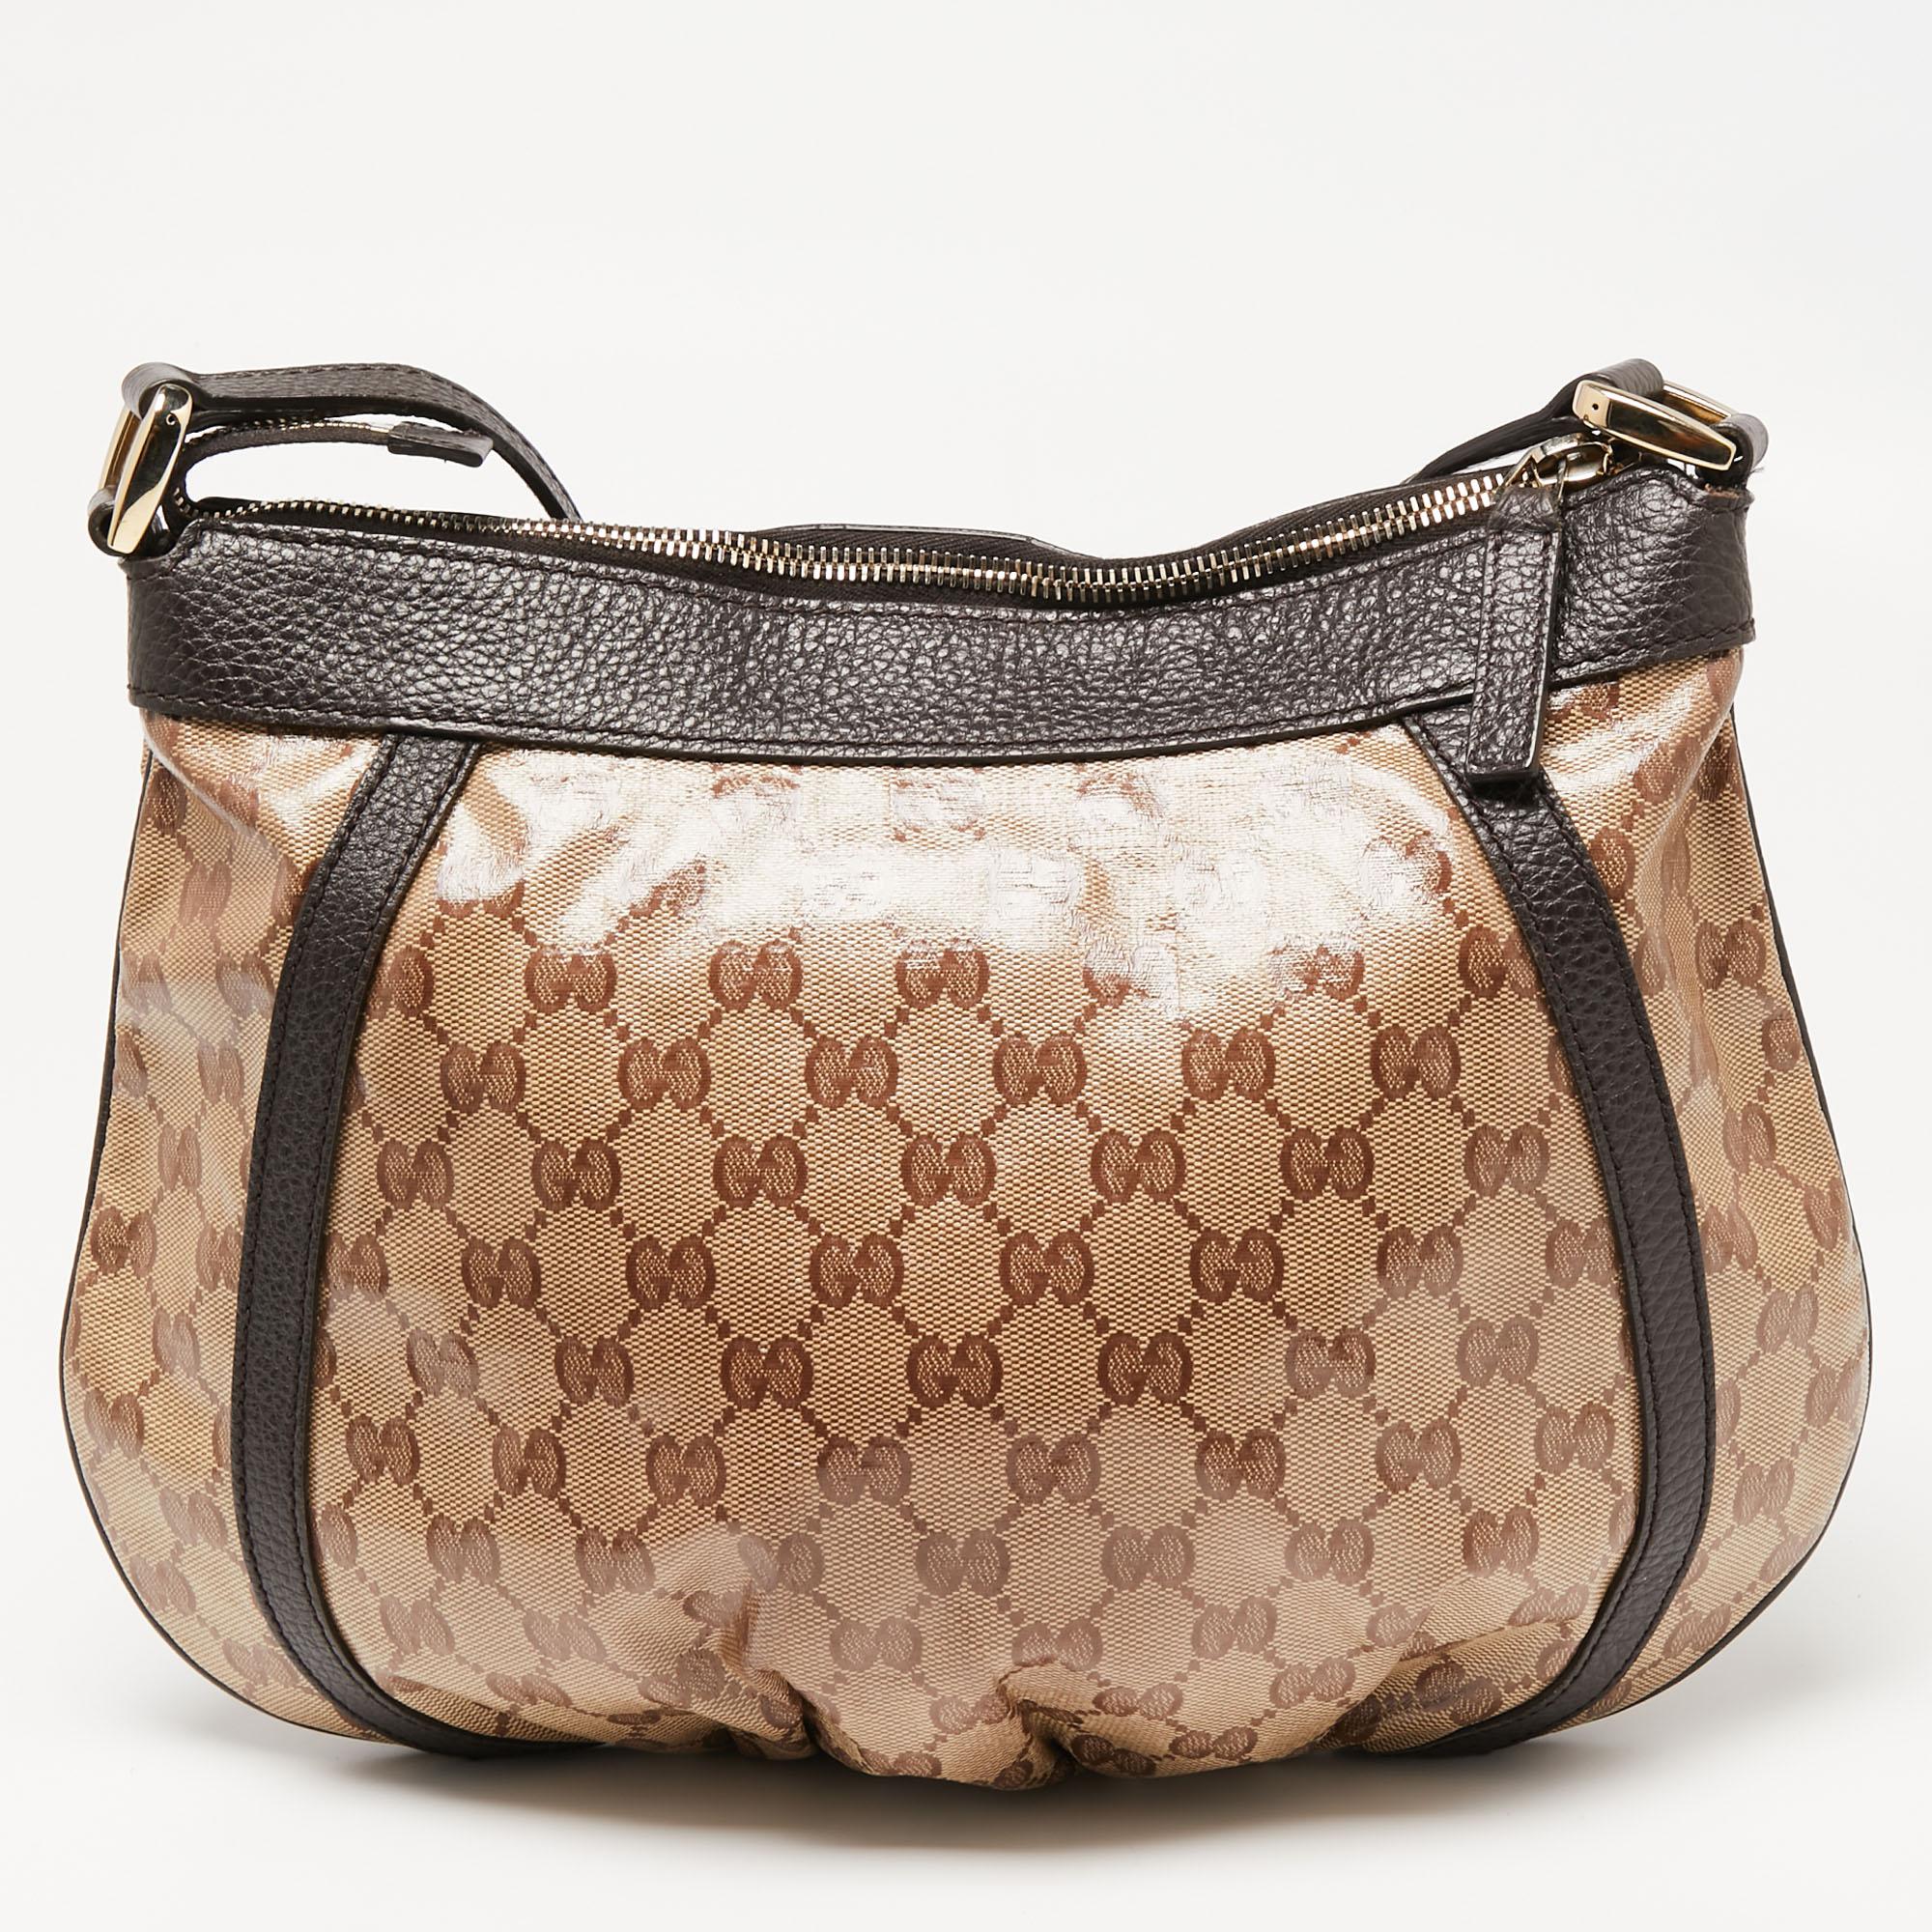 Elegance meets luxury in this Abbey D-Ring crossbody bag from the House of Gucci. It is created using brown-beige GG canvas and leather, which is highlighted with gold-tone hardware. It is completed with a shoulder strap. This stunning Gucci bag